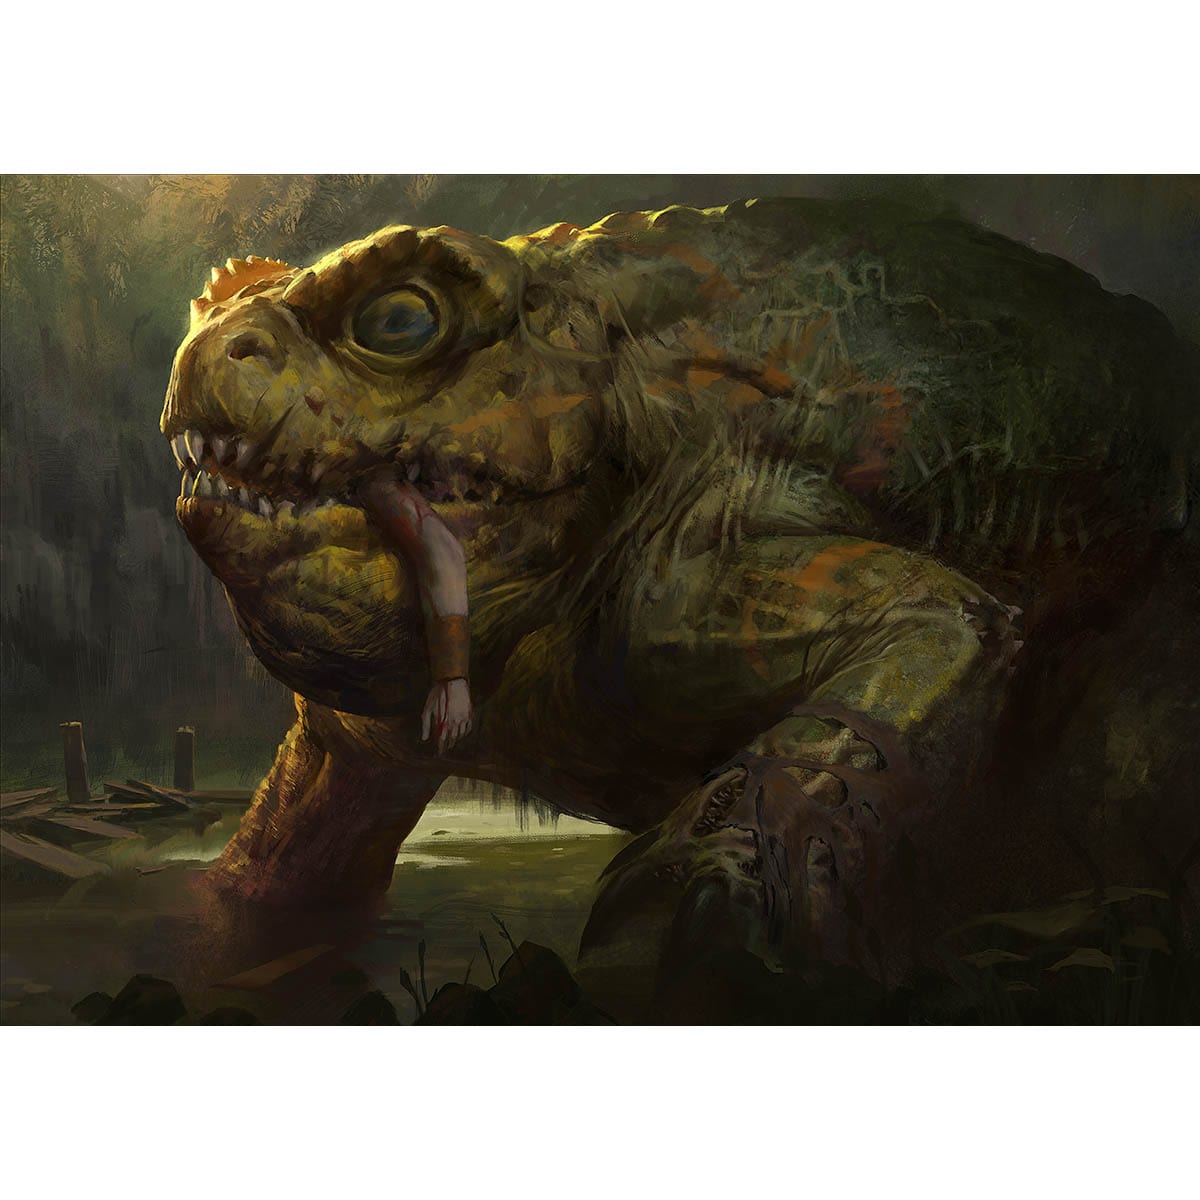 The Gitrog Monster Print - Print - Original Magic Art - Accessories for Magic the Gathering and other card games